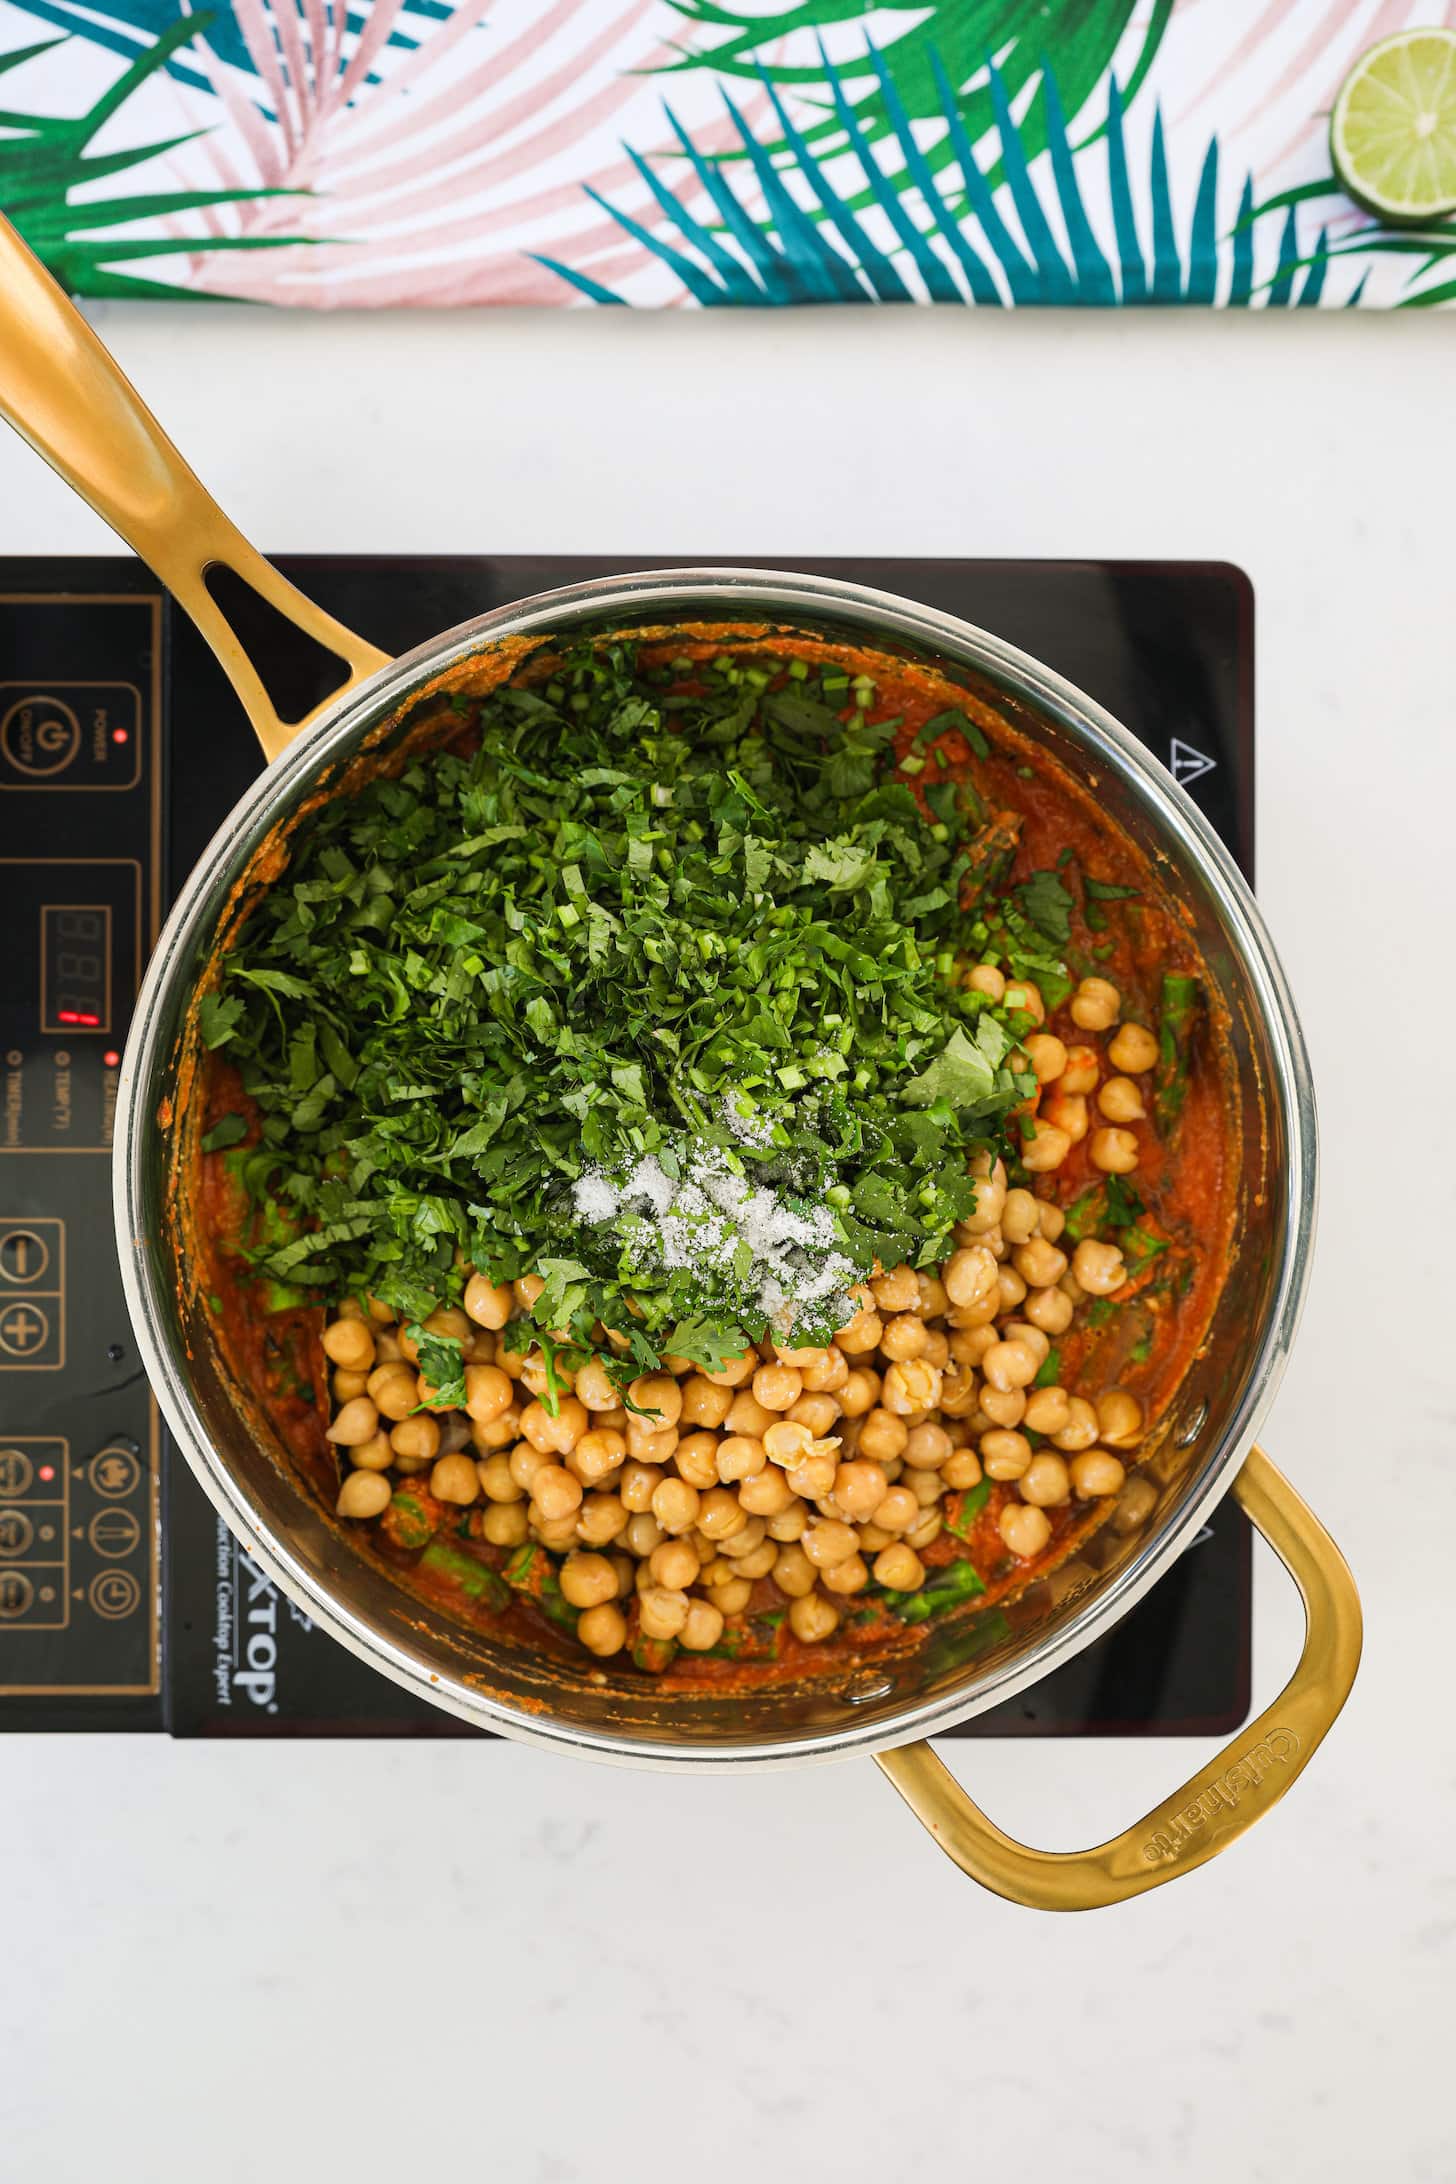 a pan of chickpeas and chopped herbs on a mobile cooktop.